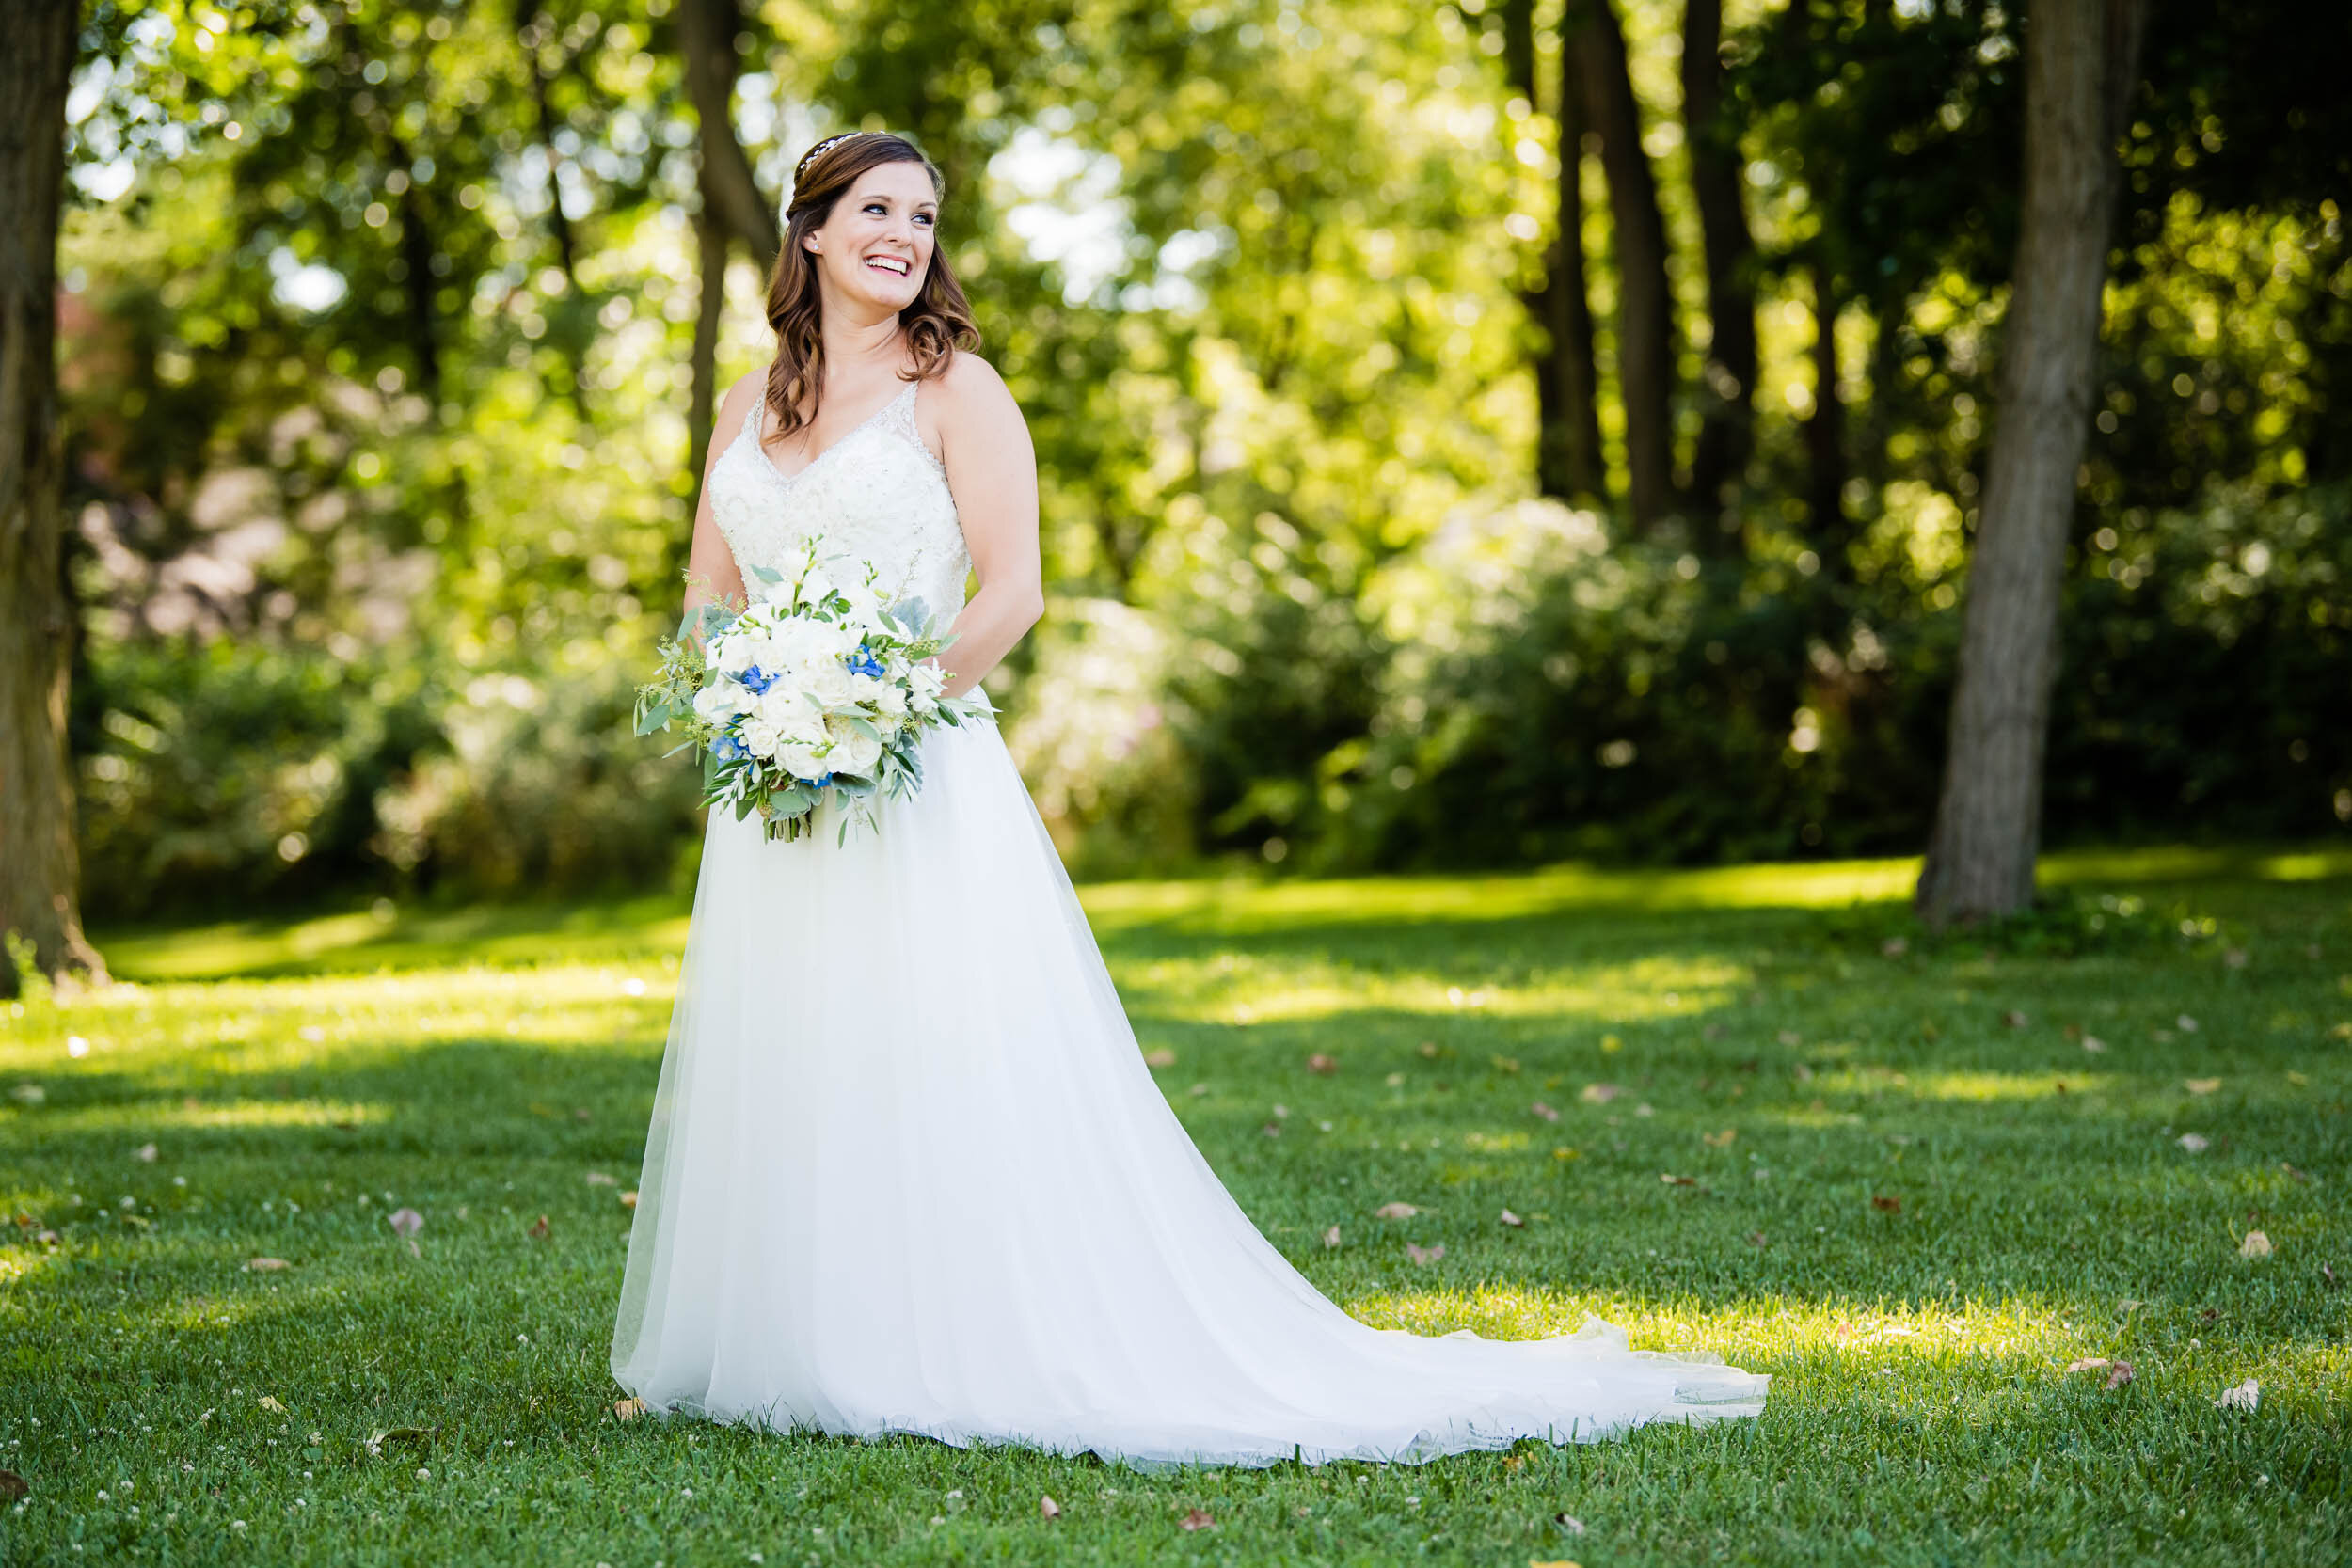 Wedding day bridal portrait:  Chicago backyard wedding photographed by J. Brown Photography.